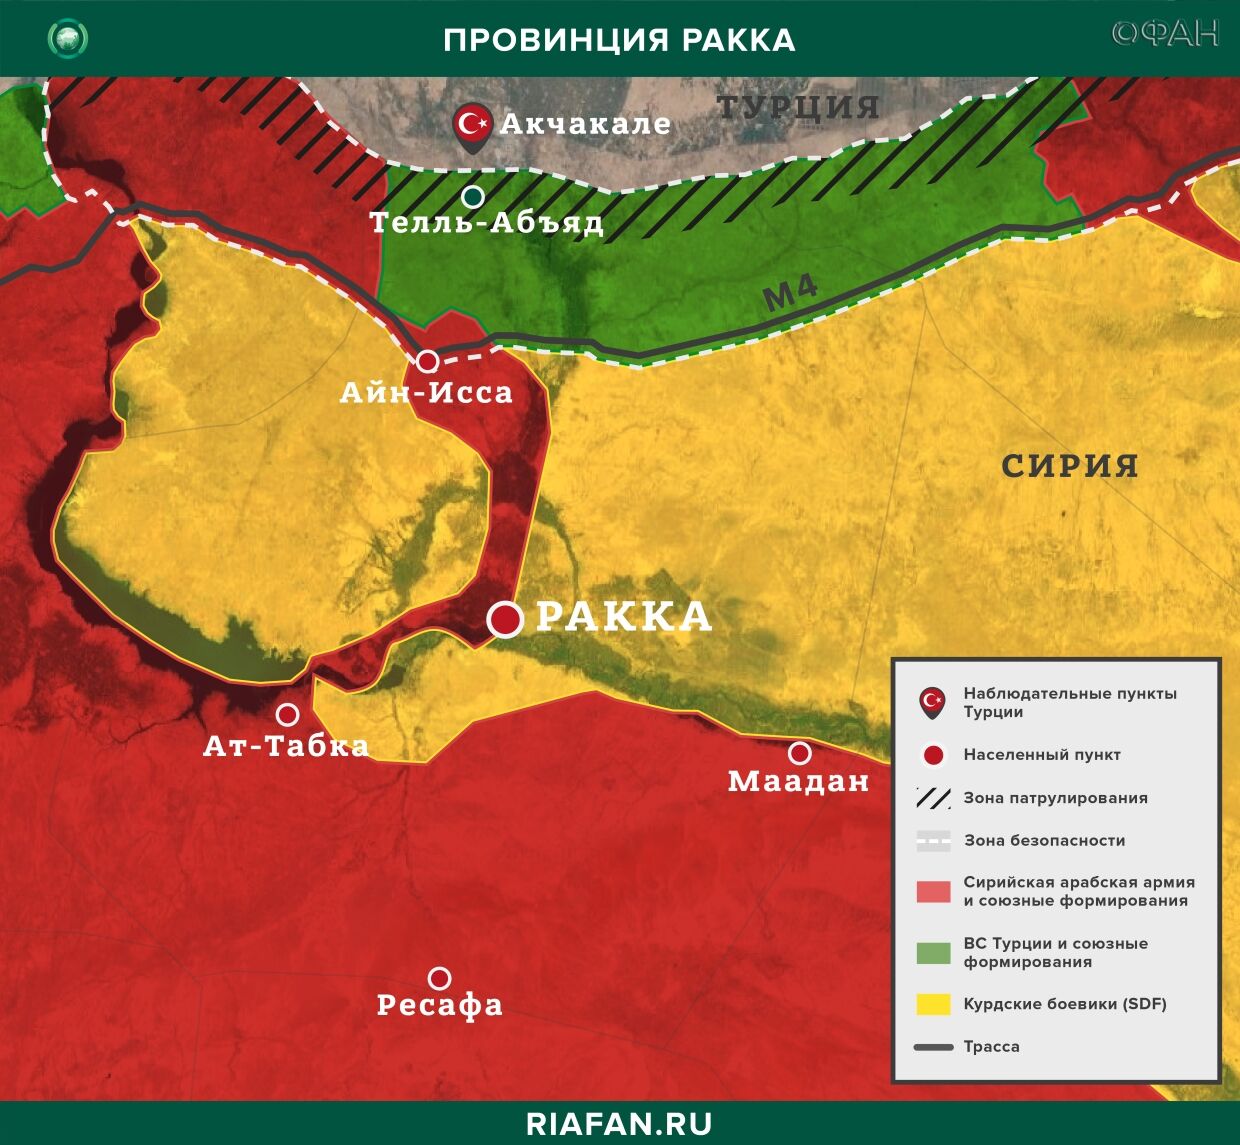 Syria the results of the day on 30 April 06.00: Kurds say they are not involved in terrorist attack in Afrin, The United States is throwing equipment to the east of the ATS